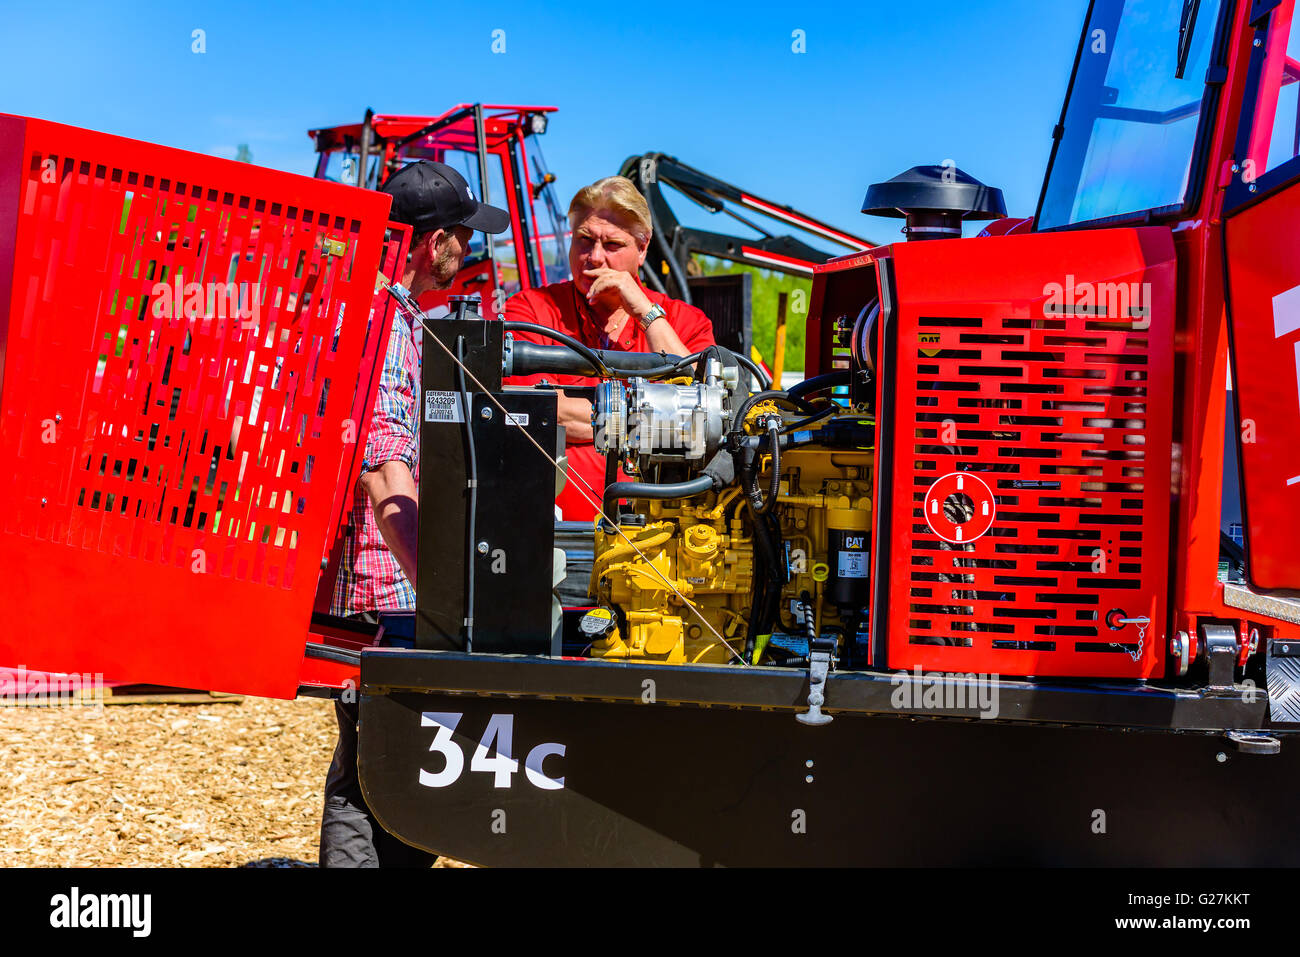 Emmaboda, Sweden - May 13, 2016: Forest and tractor (Skog och traktor) fair. The engine room of a Terri 34 harvester and forward Stock Photo